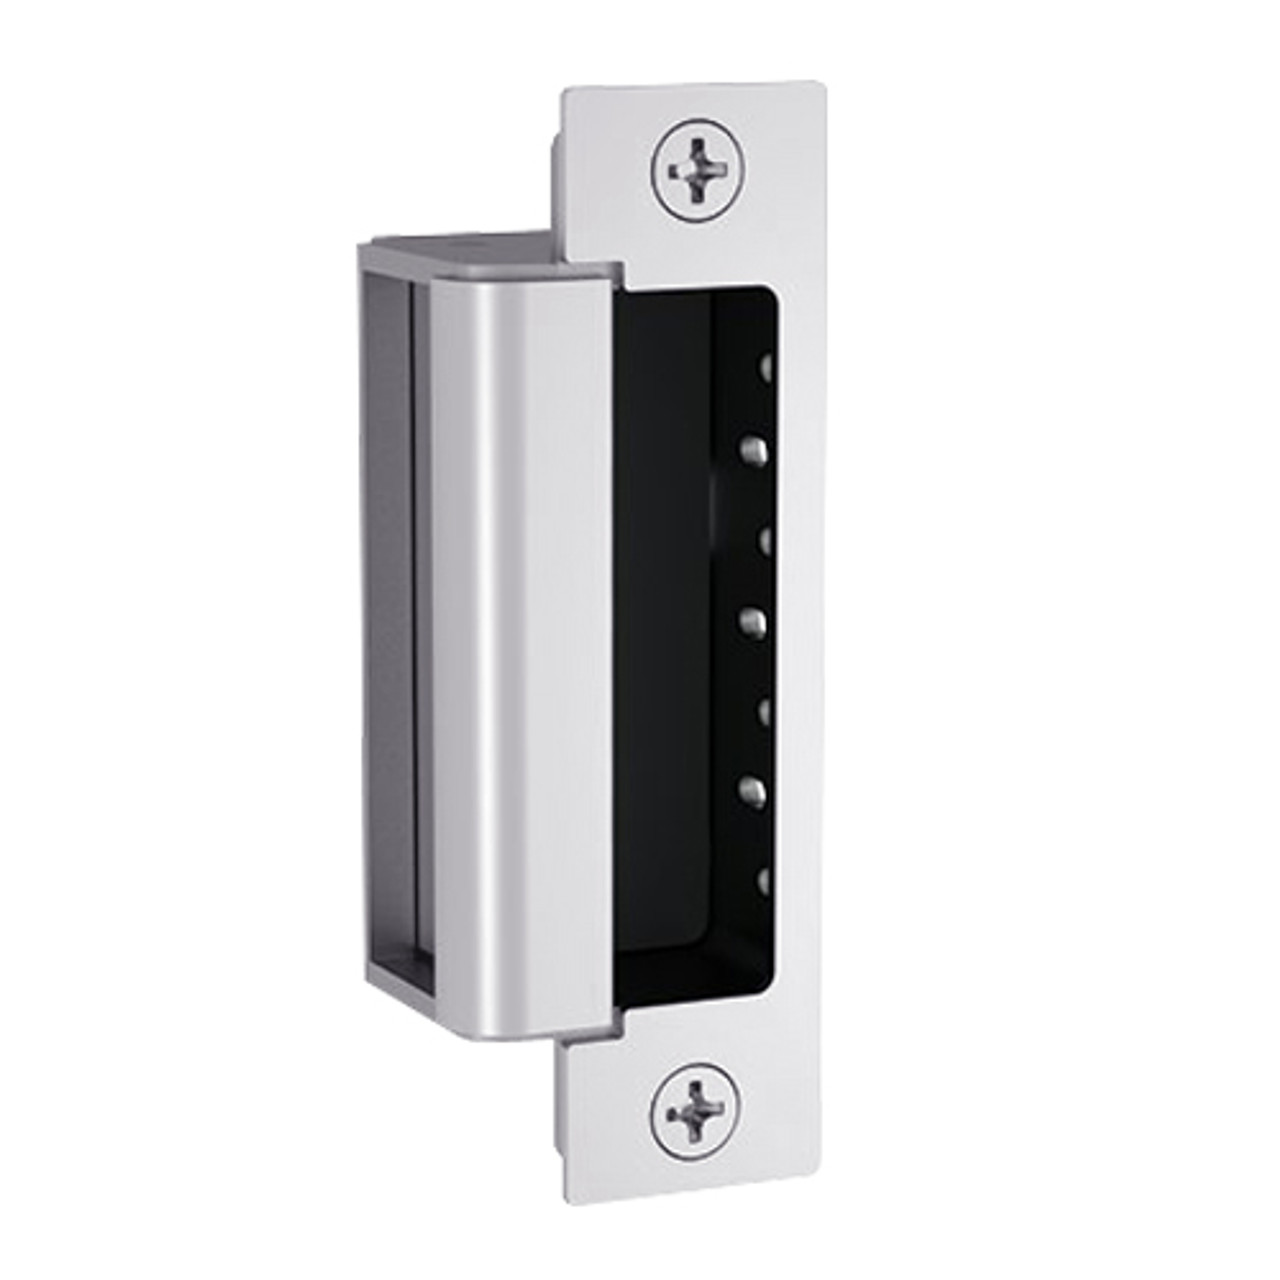 1600-CS-DLM-629 Hes 1600 Series Dynamic Complete Low Profile Electric Strike for Latchbolt and Deadbolt Lock with Dual Lock Monitor in Bright Stainless Steel